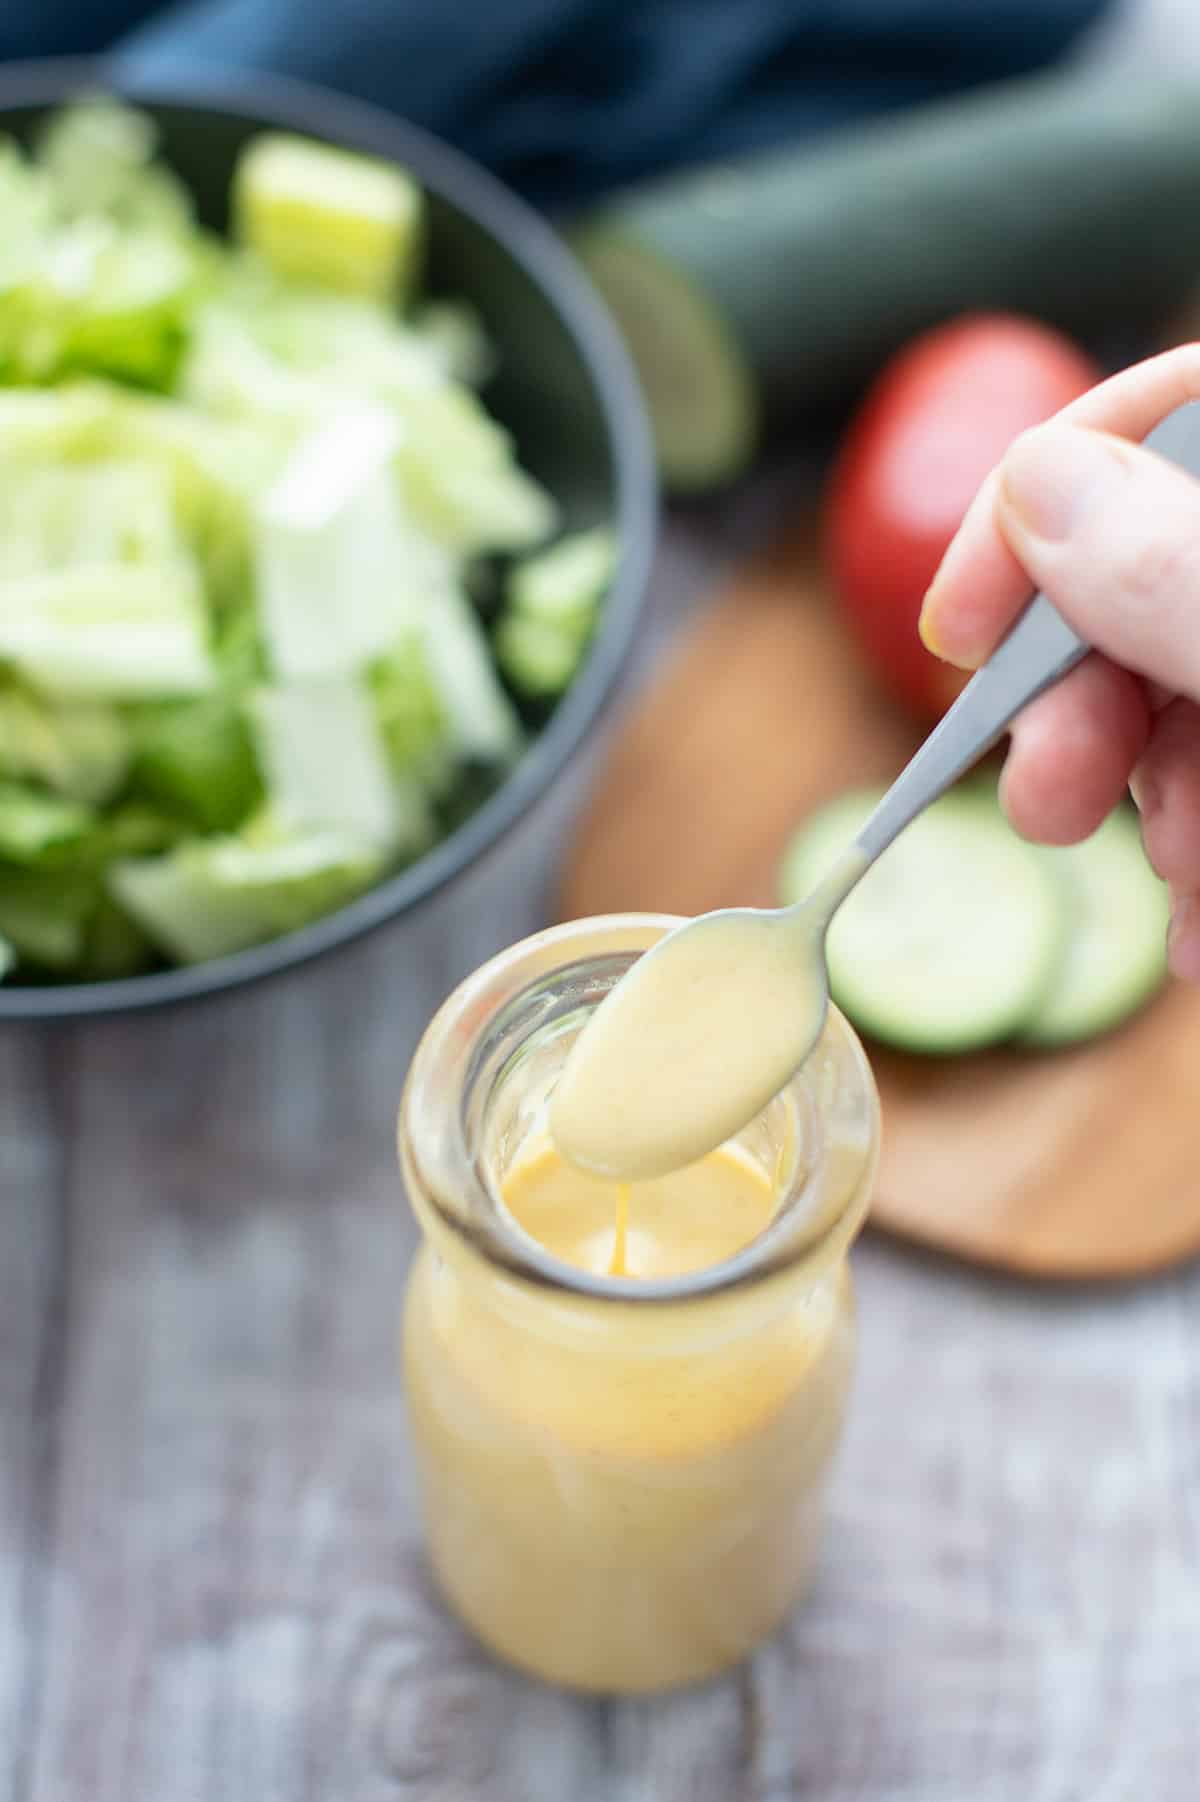 Keto honey mustard dressing in a glass bottle with salad makings around it.